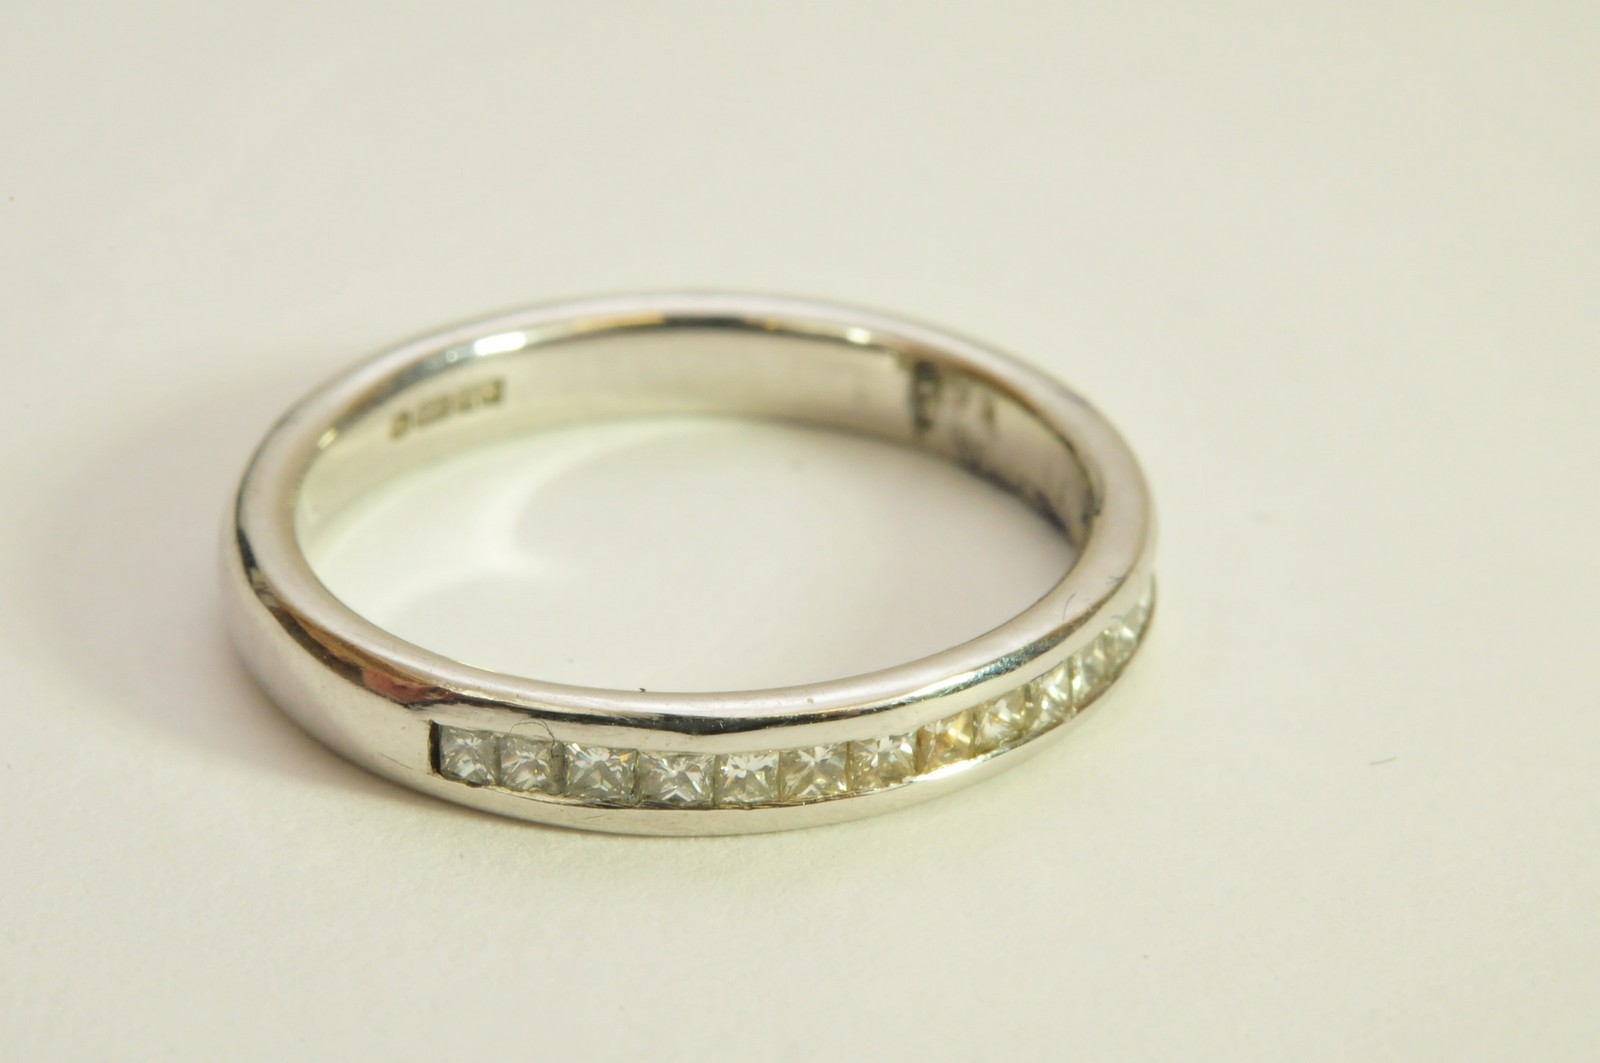 A ladies 18ct white gold half eternity ring, channel set with a single row of princess cut diamonds